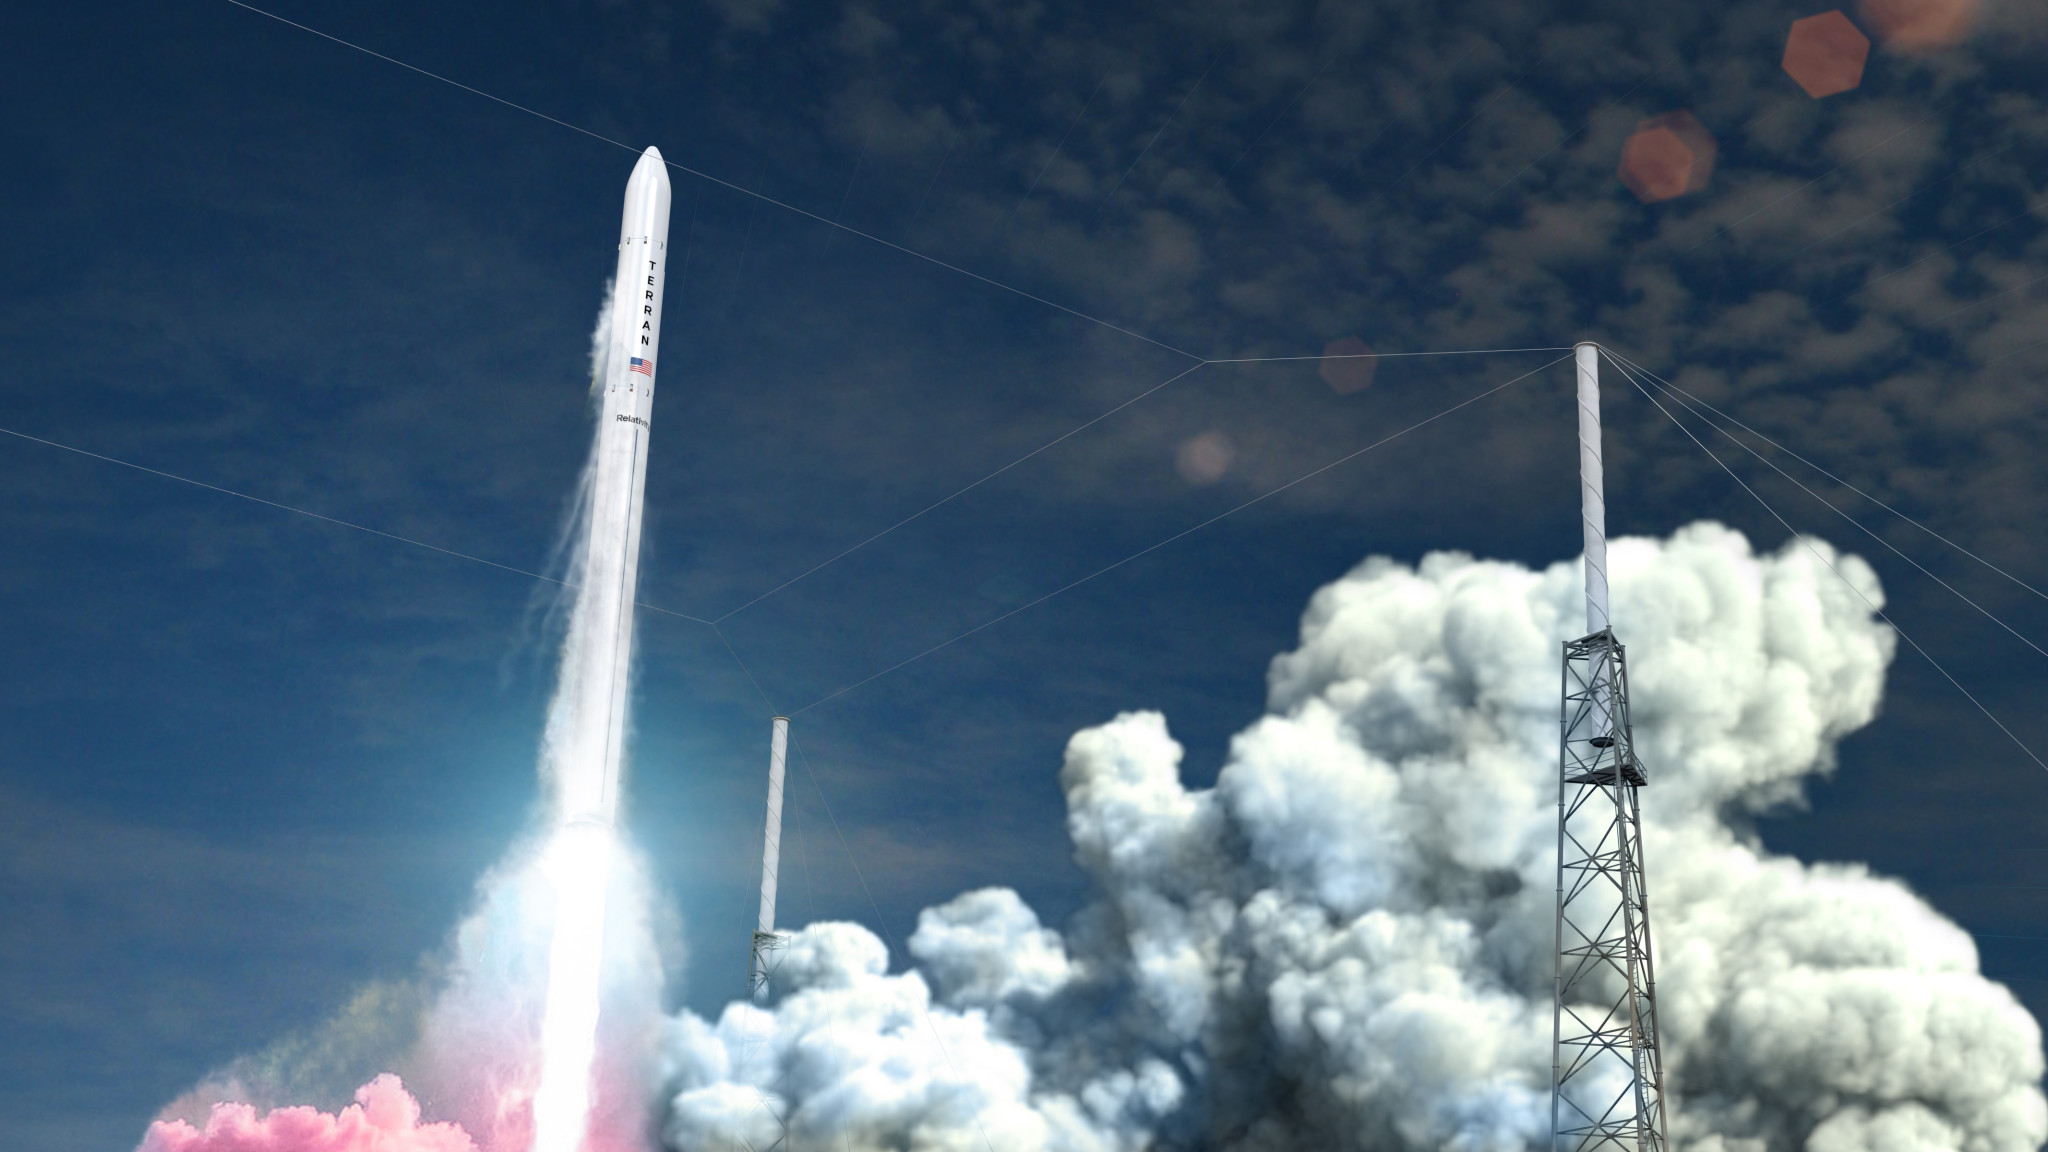 relativity-space-takes-lease-of-historic-test-stand-from-nasa-to-accelerate-terran-r-development